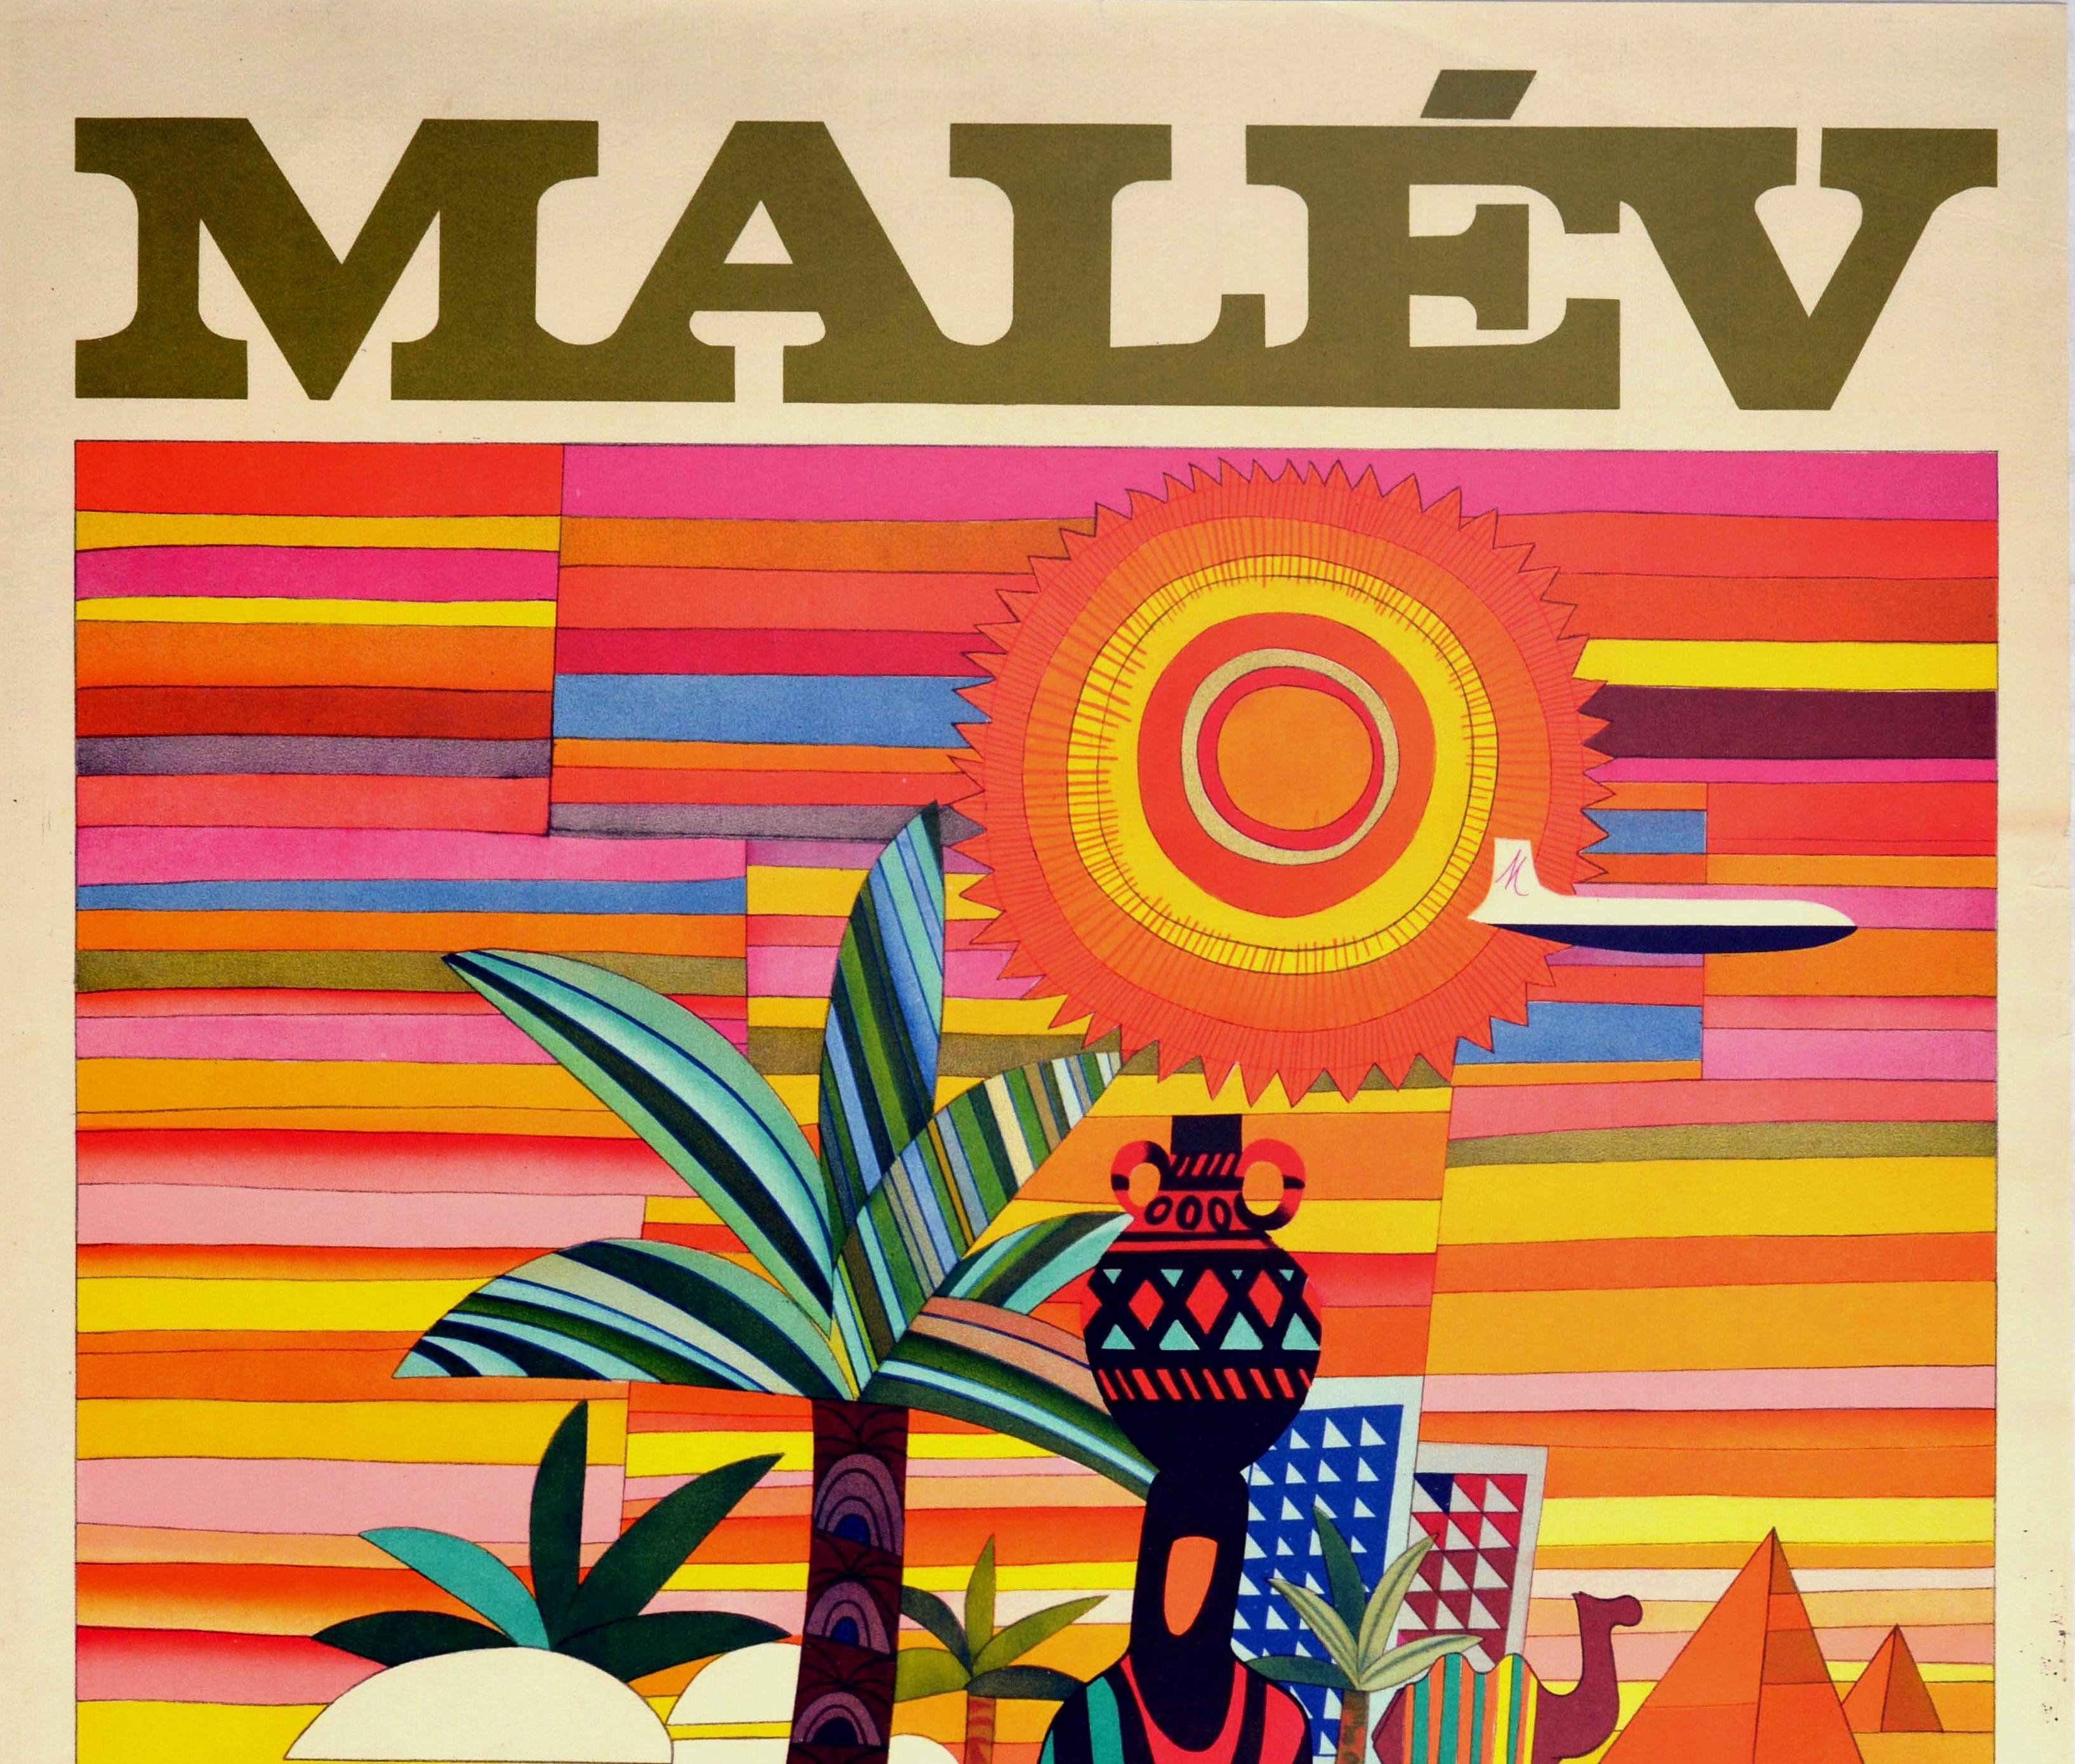 Original vintage travel advertising poster, Fly Malev Hungarian Airlines to the Middle East via Budapest - featuring a colourful mosaic collage style illustration depicting a plane flying across a multicoloured sky in front of an shining orange red